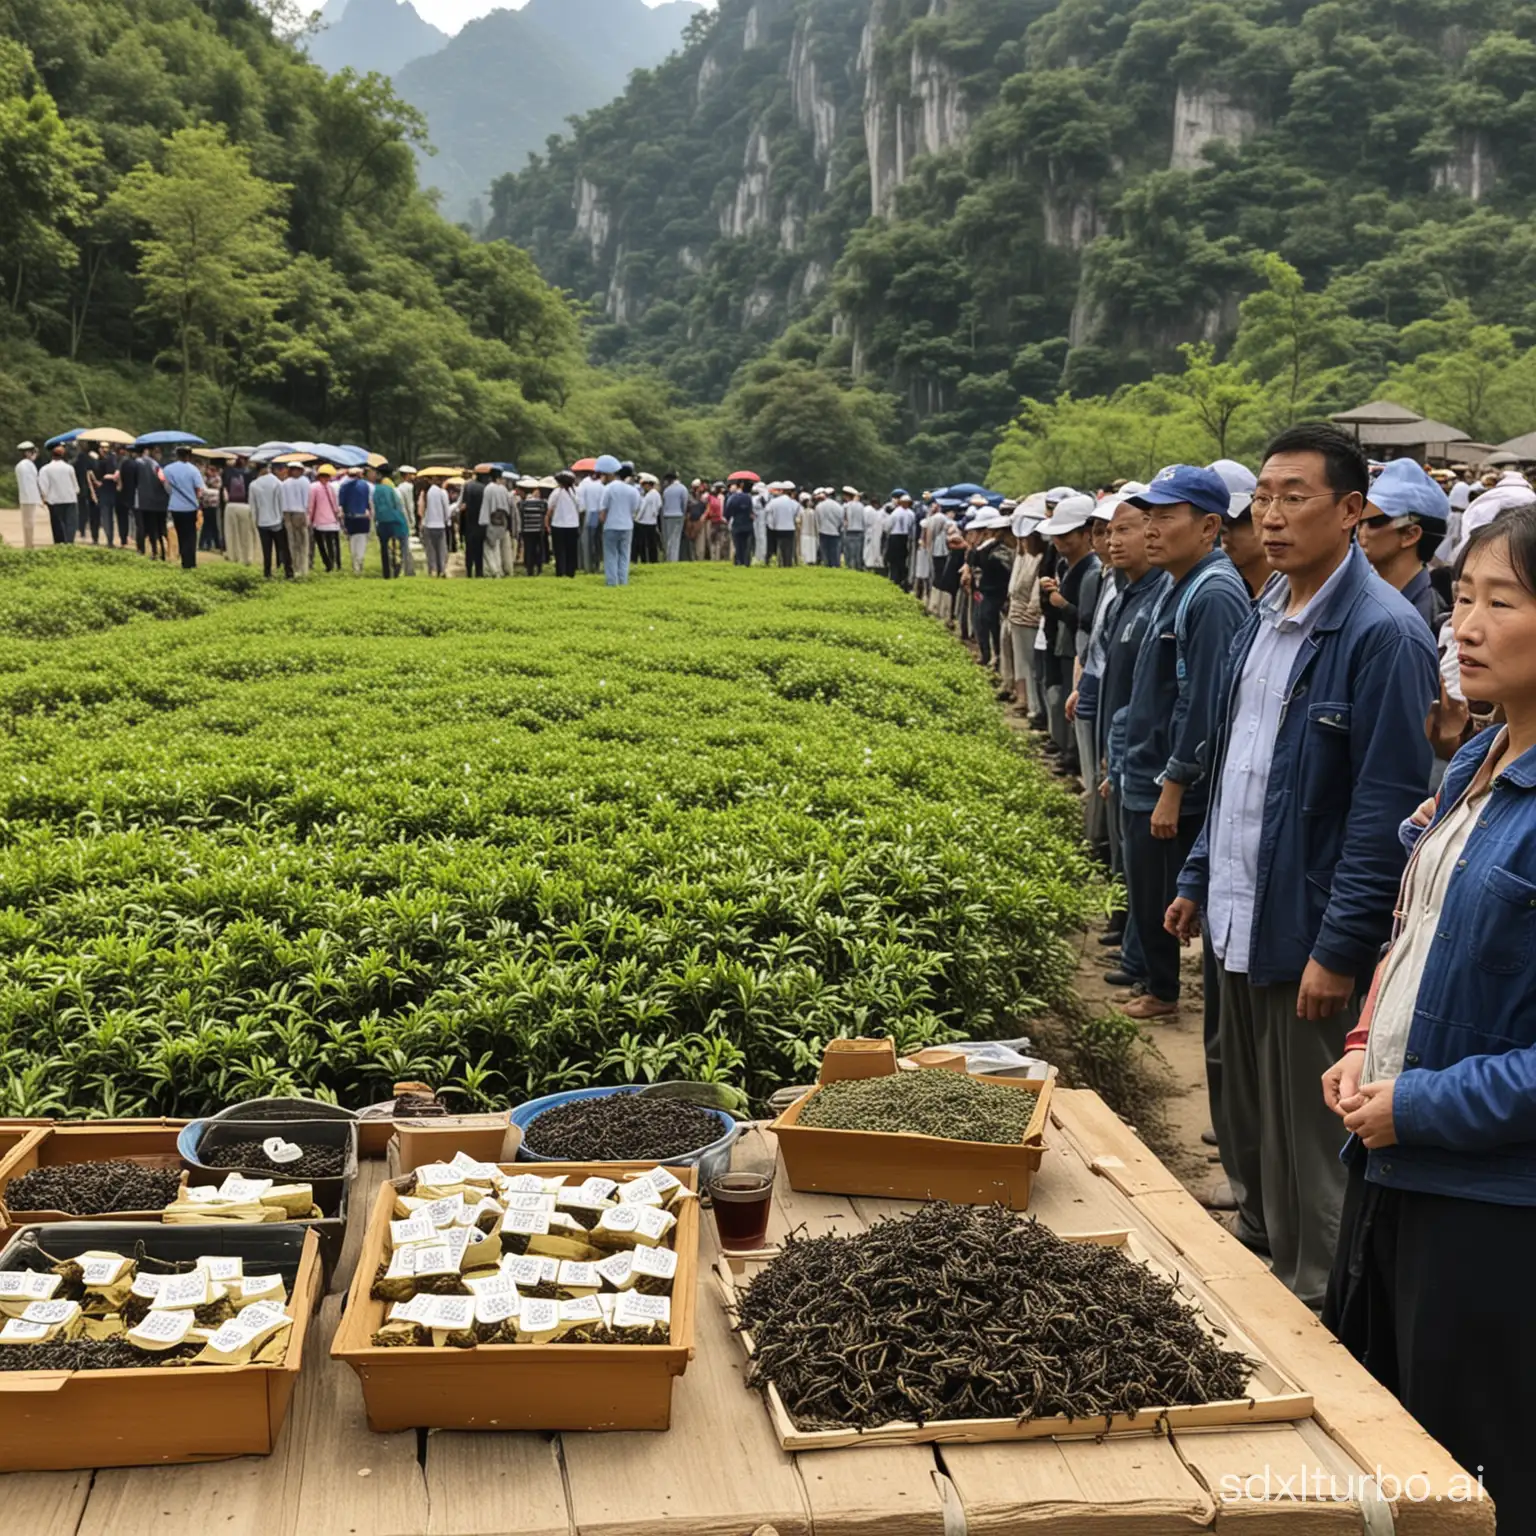 Wuyi Mountain tea as the main focus, with a crowd in the background